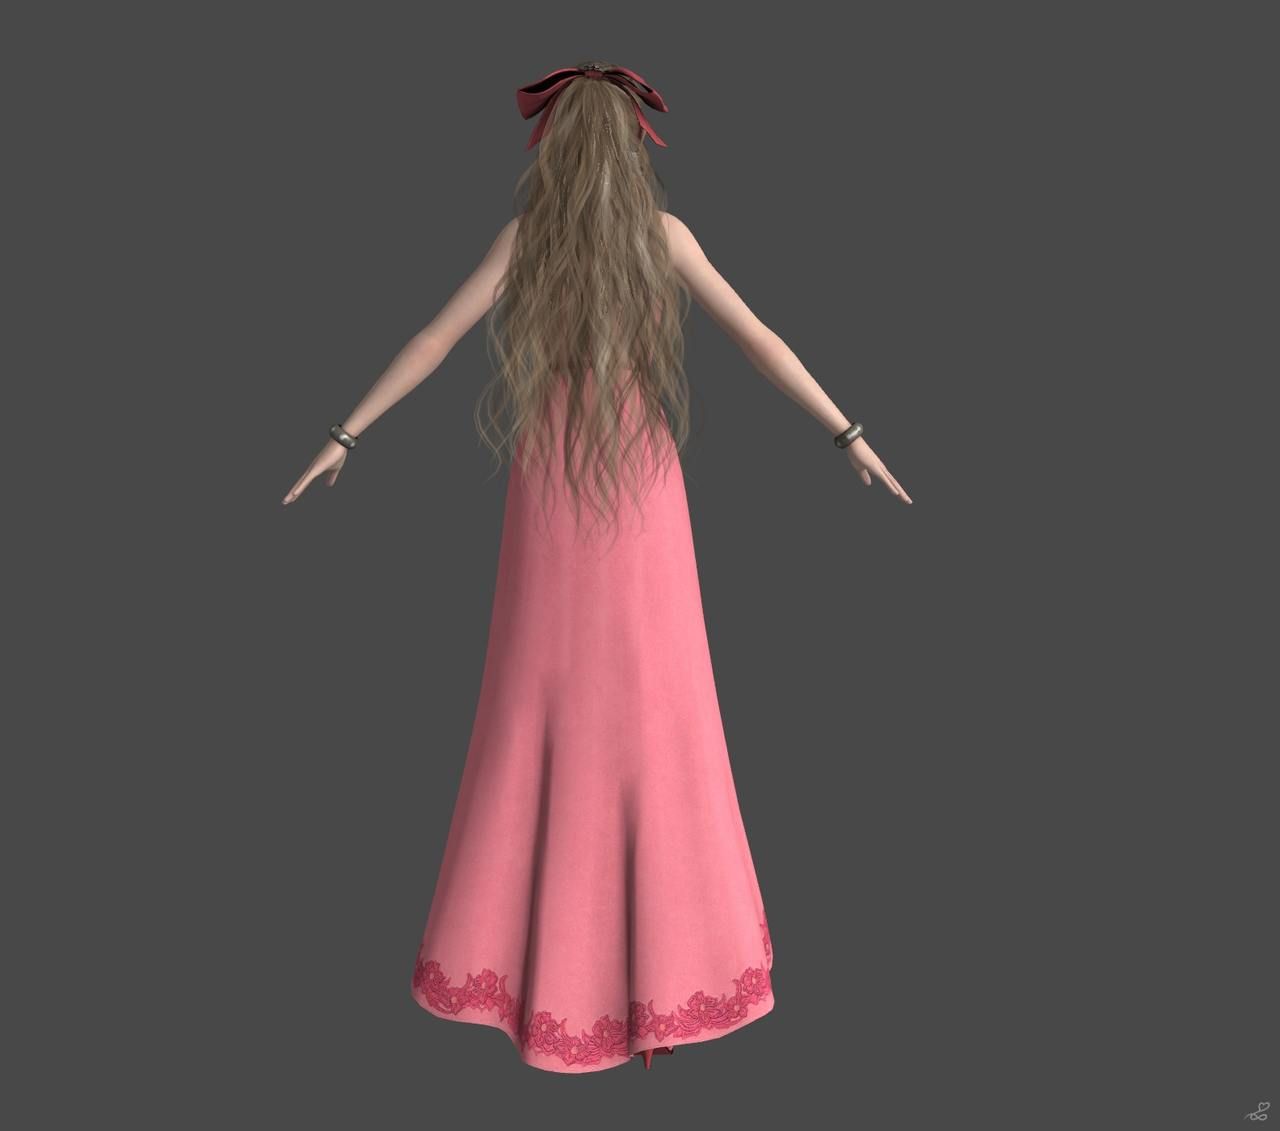 [J.A.] FF7 Remake | Aerith Reference 2